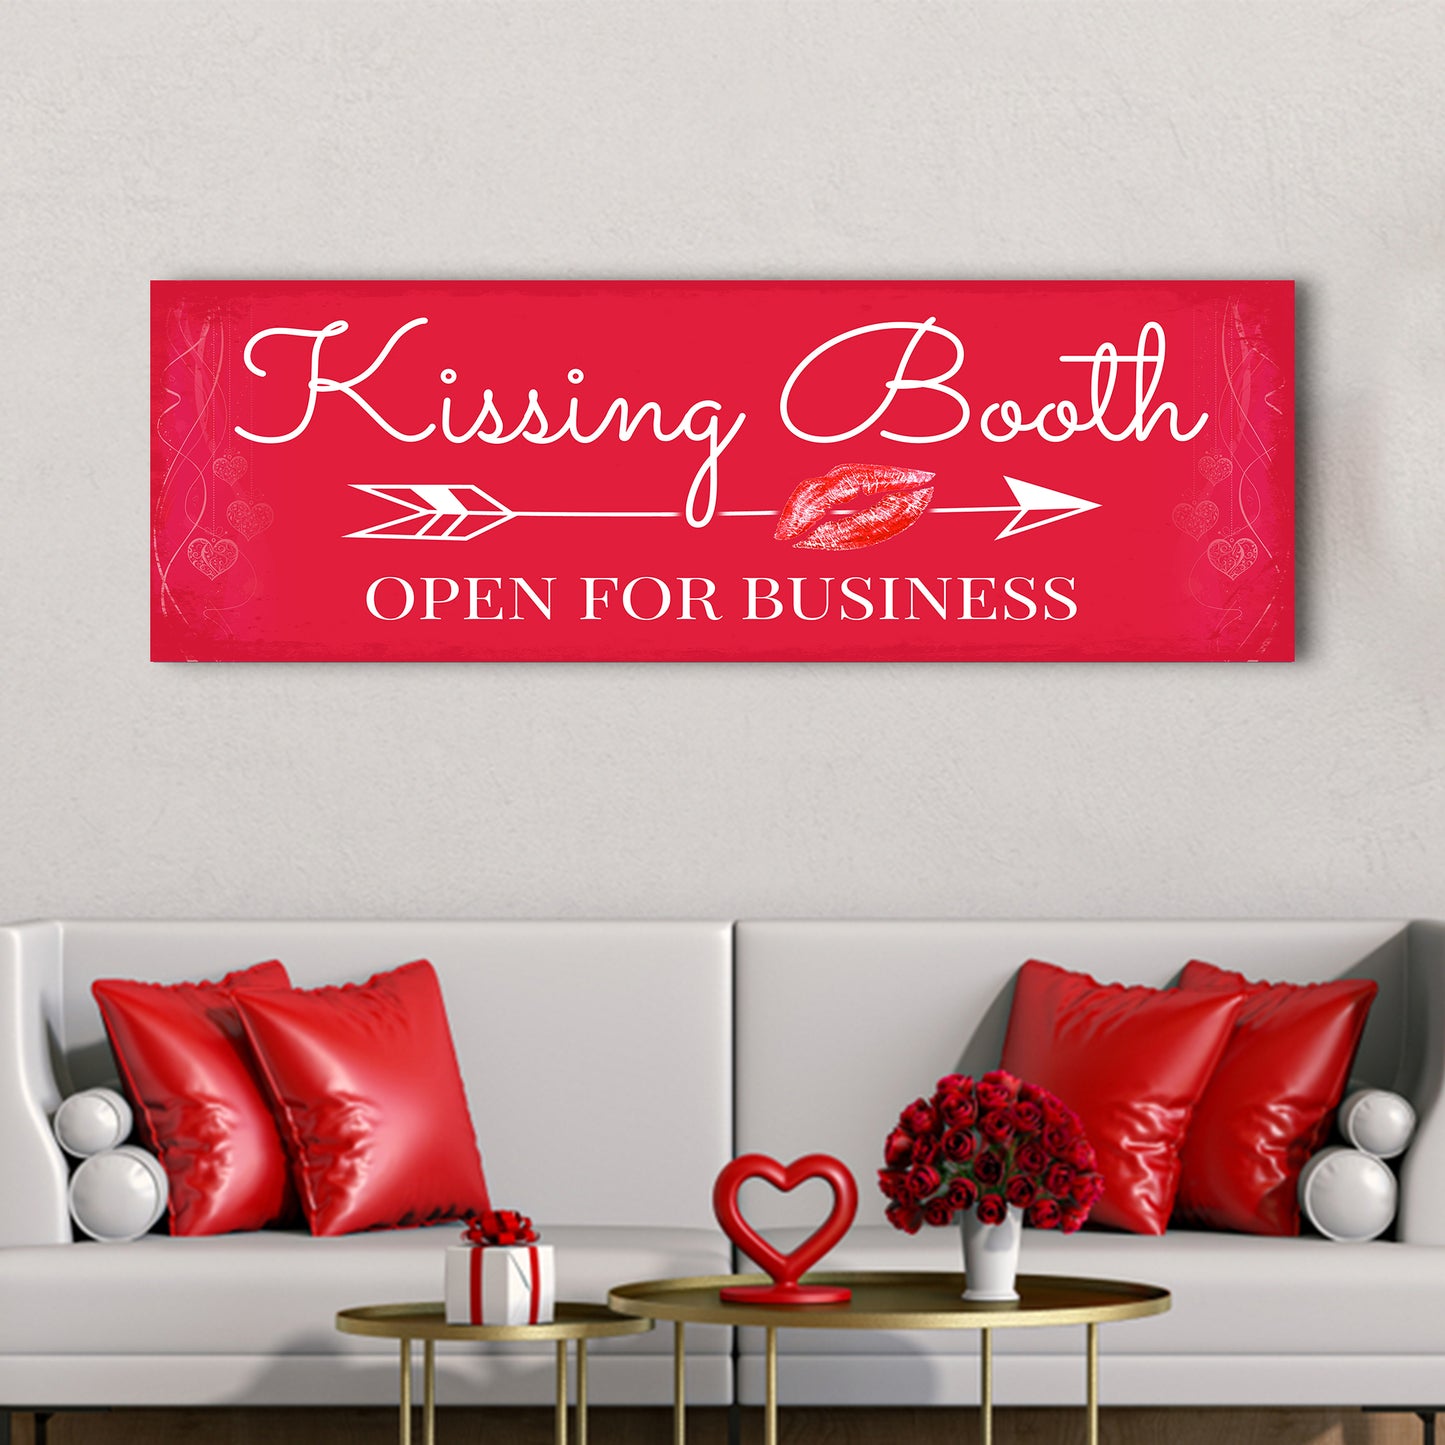 Kissing Booth "Open For Business" Sign - Image by Tailored Canvases